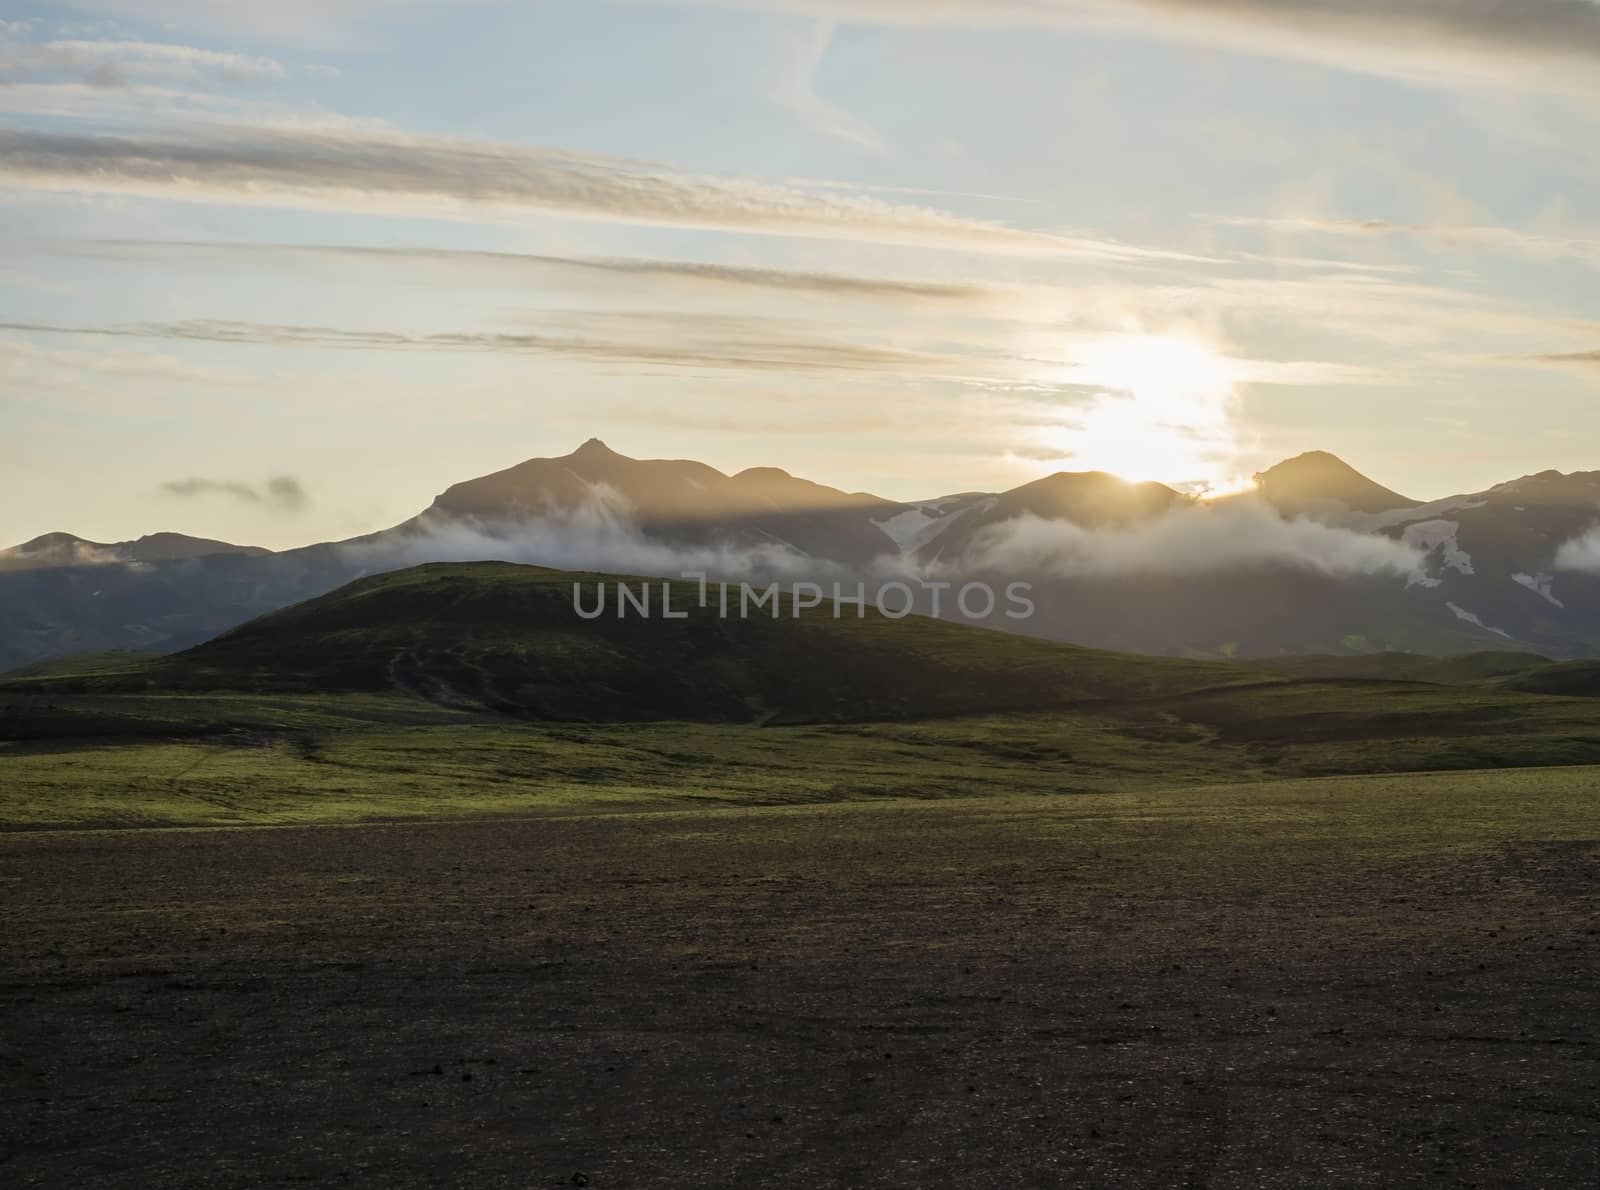 Sunrise at Alftavatn camping site with snow covered mountains and green hills. Landscape of the Fjallabak Nature Reserve in the Highlands of Iceland.